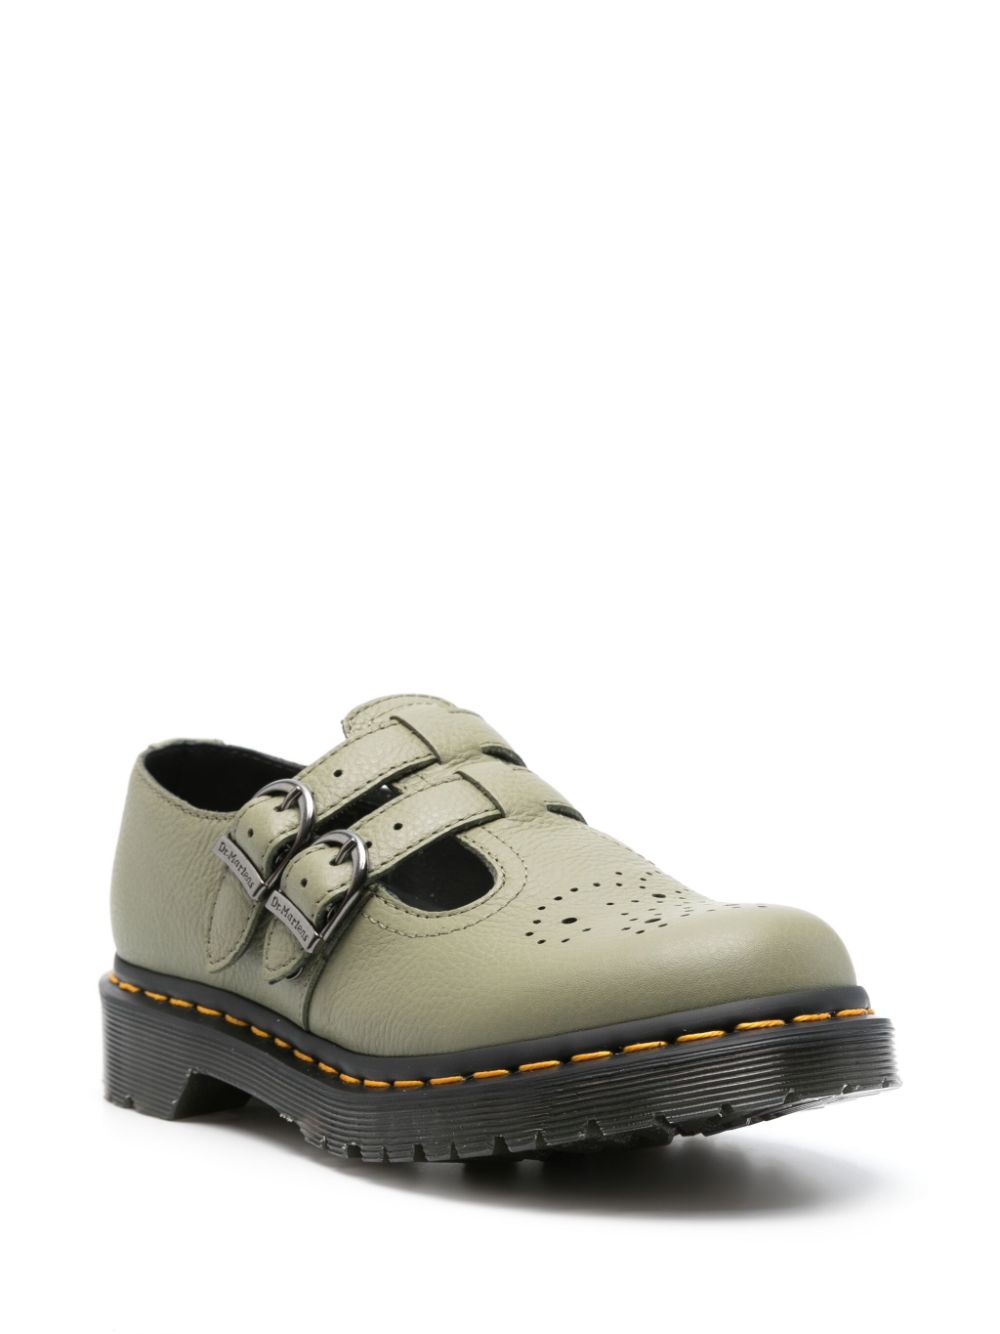 Dr. Martens DR. MARTENS- 8065 Mary Jane Leather Shoes